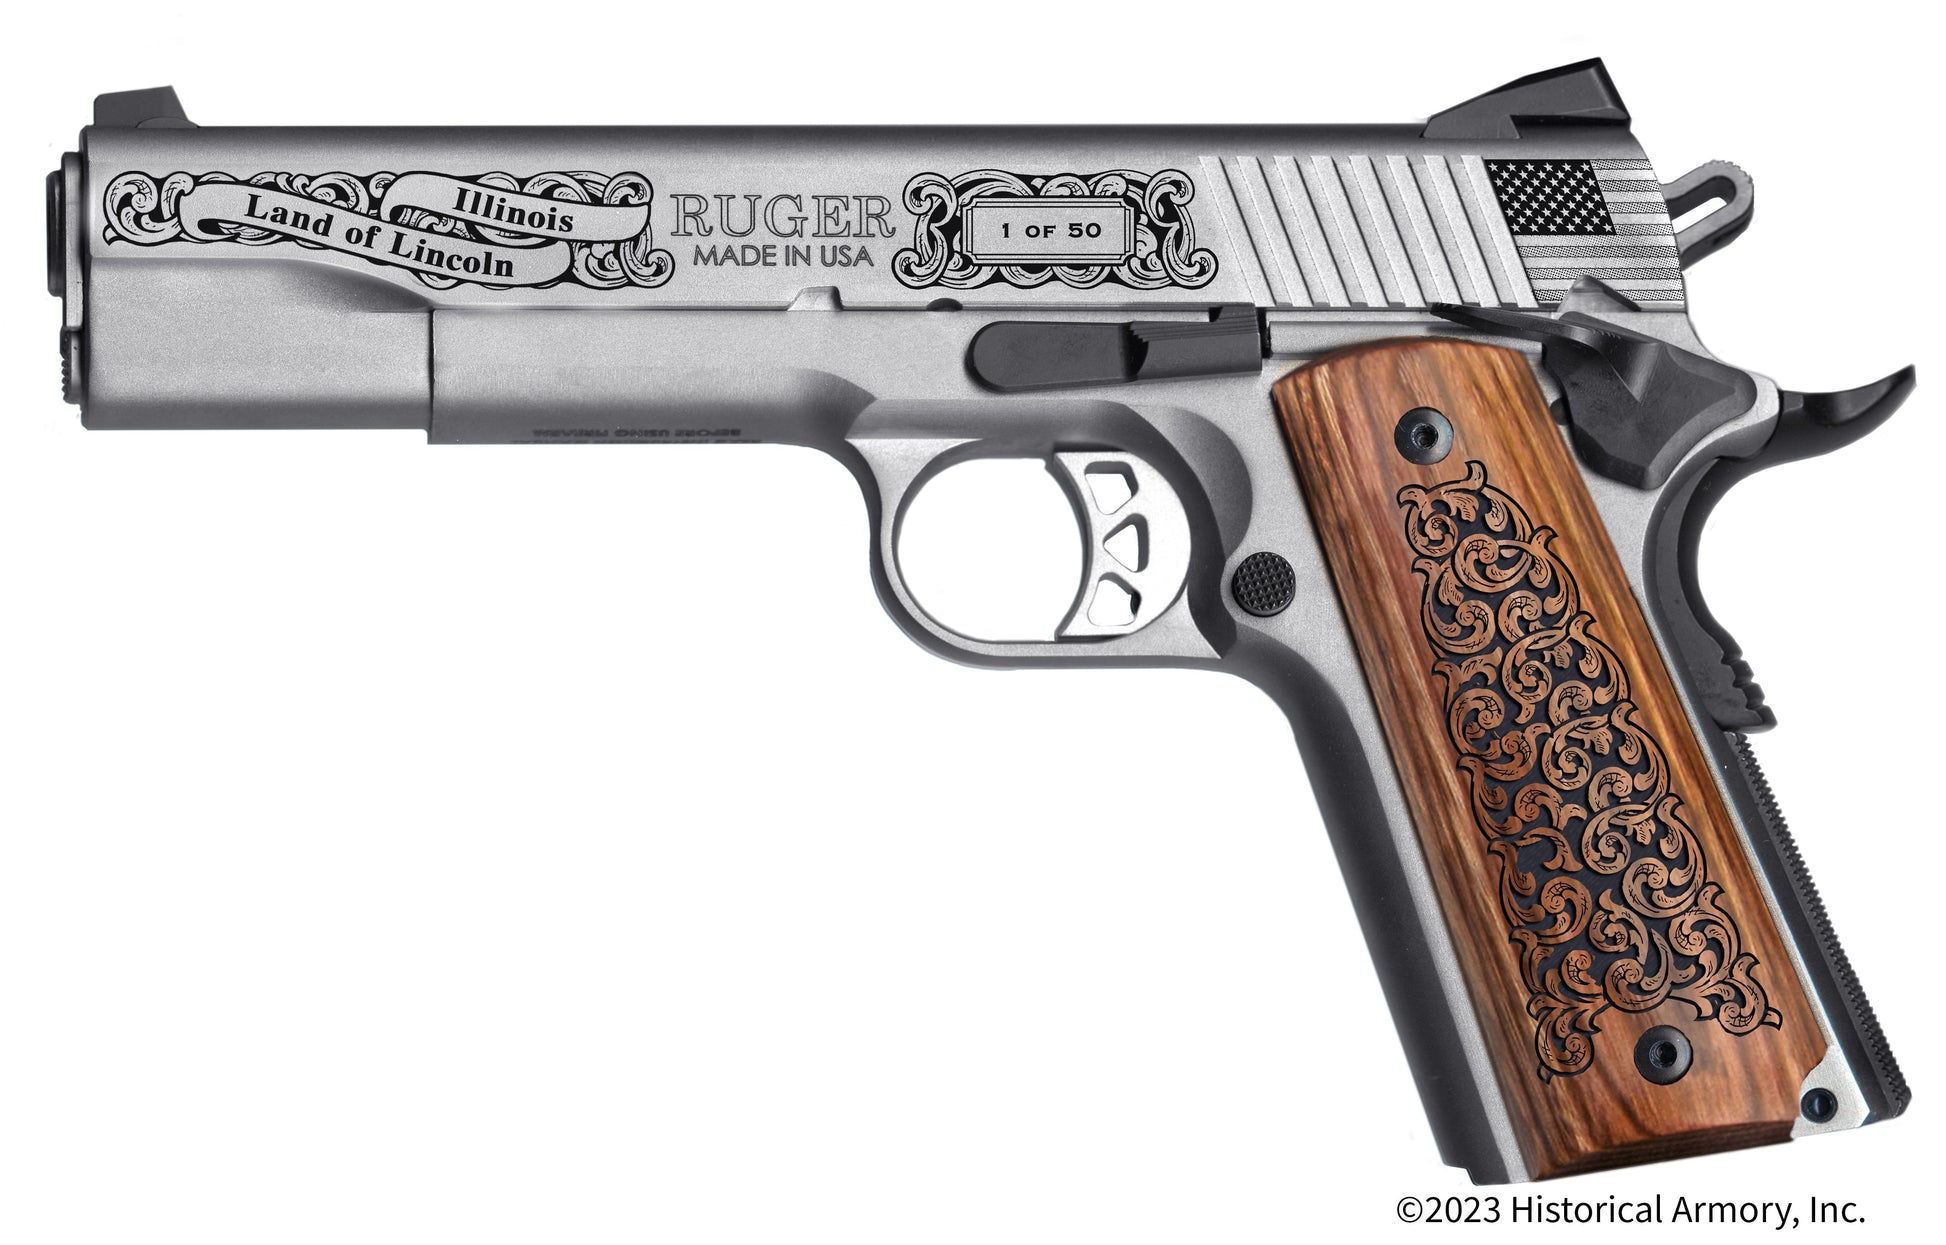 Logan County Illinois Engraved .45 Auto Ruger 1911